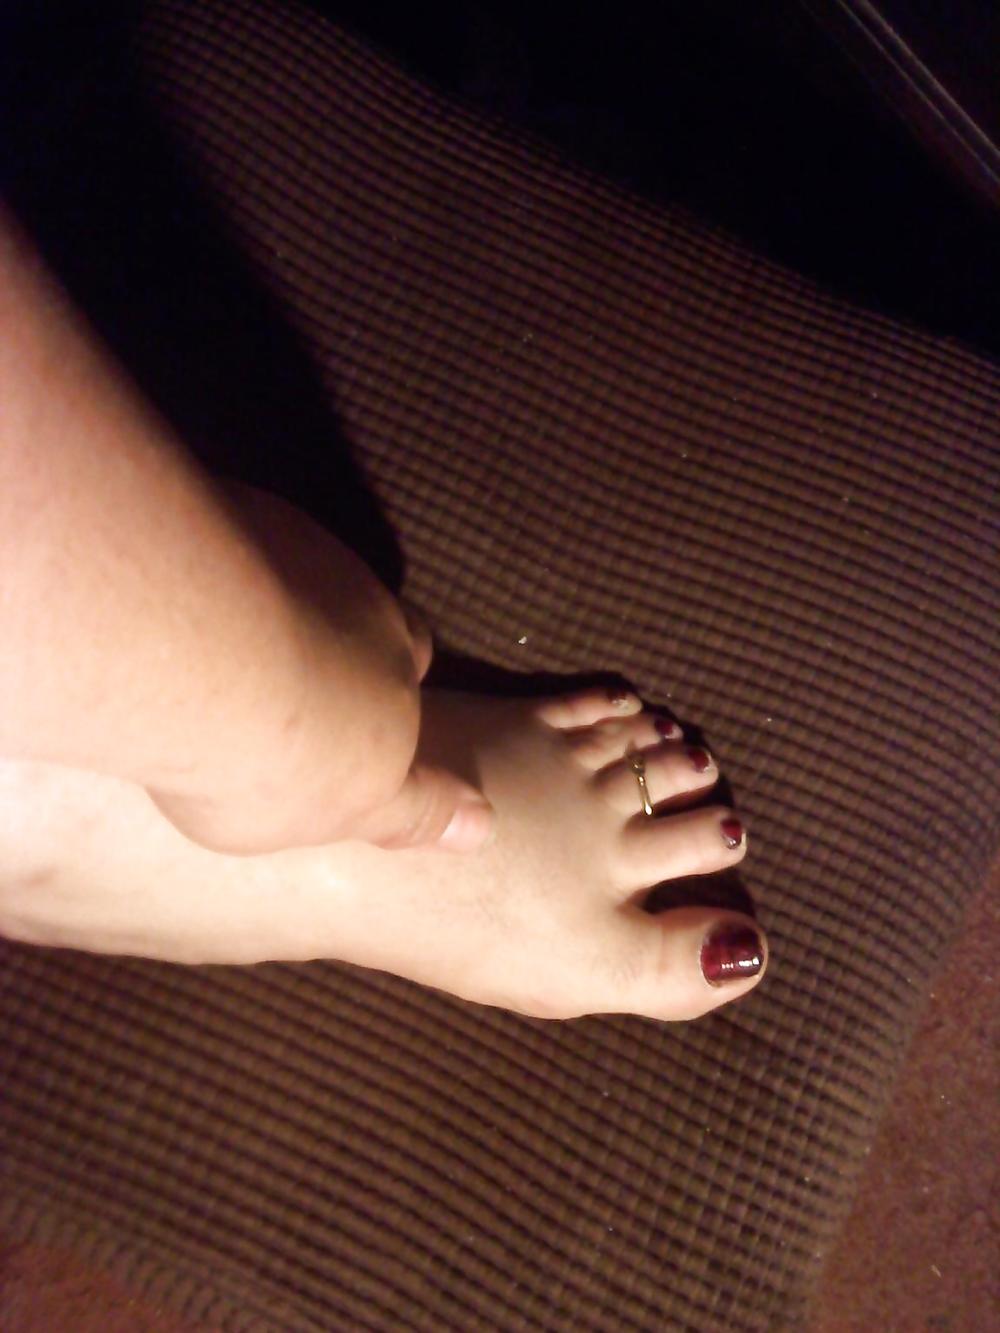 Want cum on my toes please #2349323